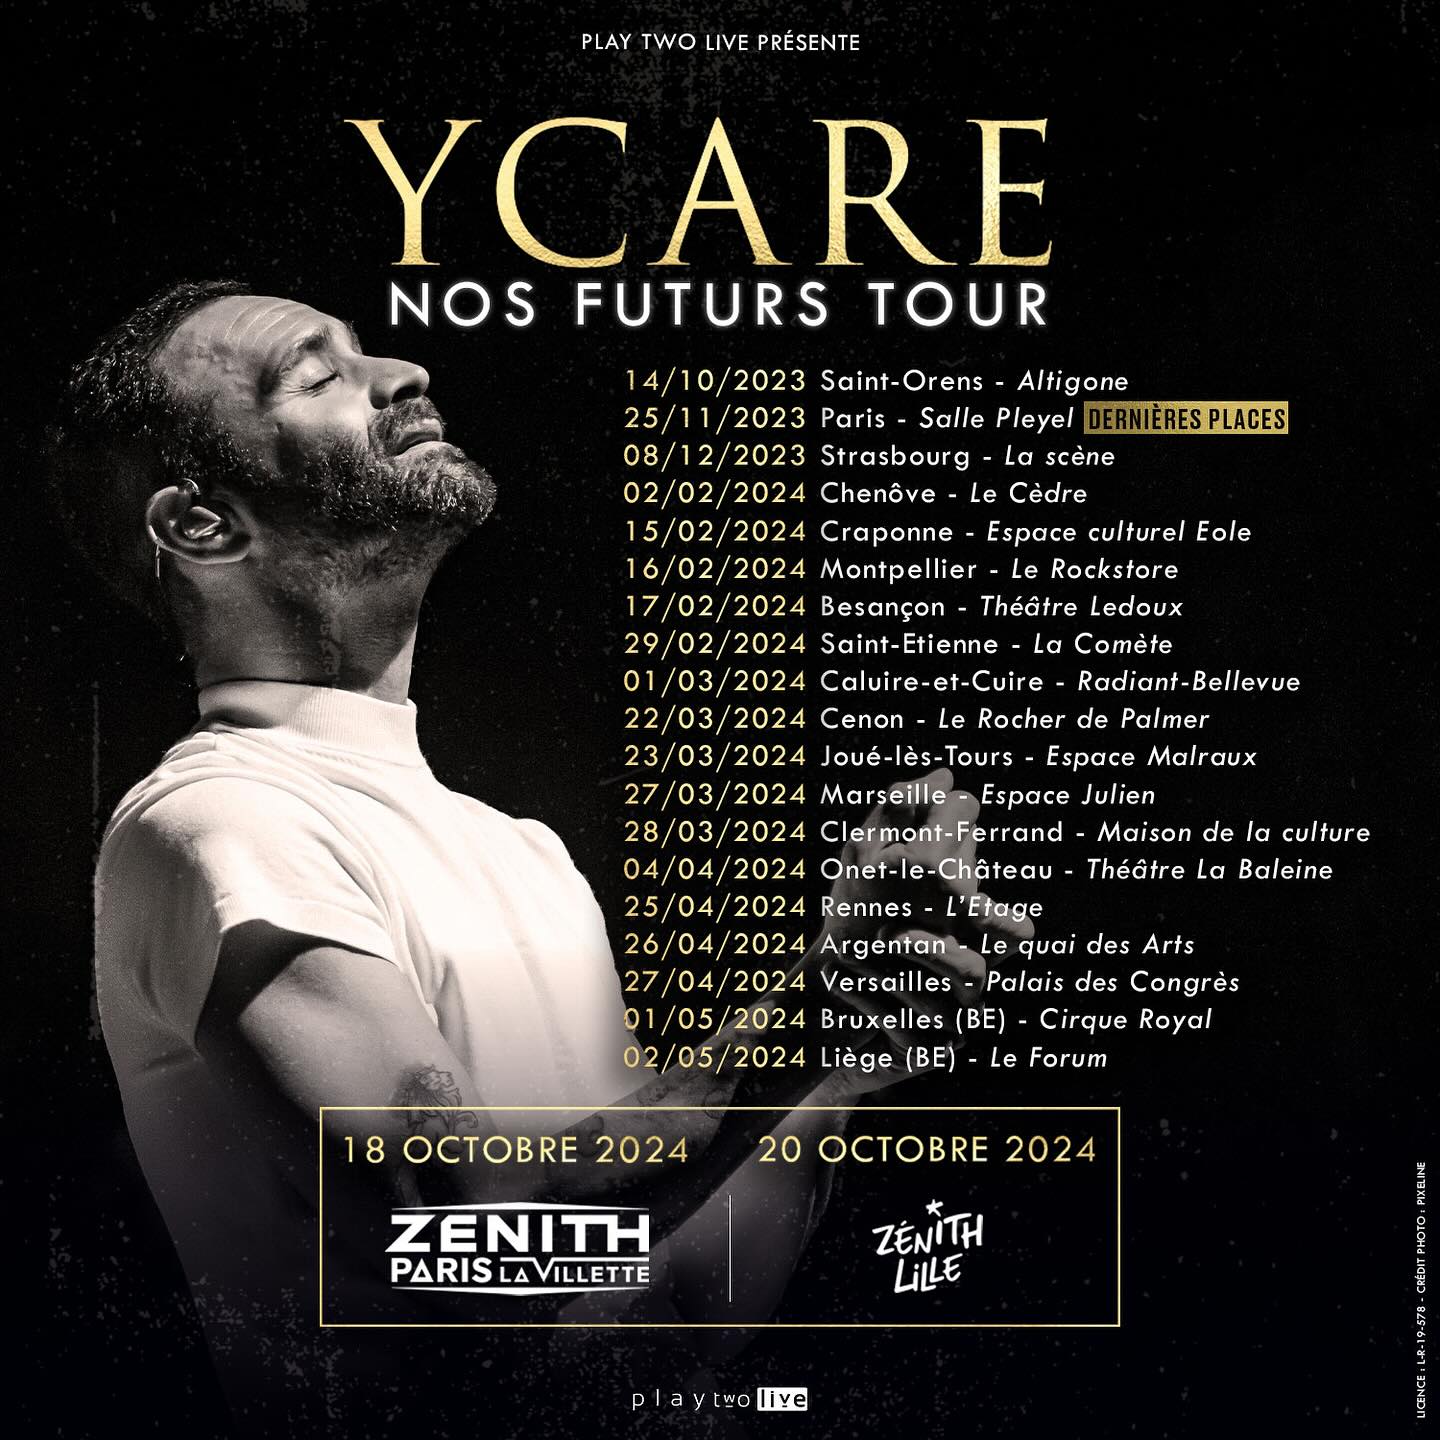 Ycare - Nos Futurs Tour at Zenith Lille Tickets